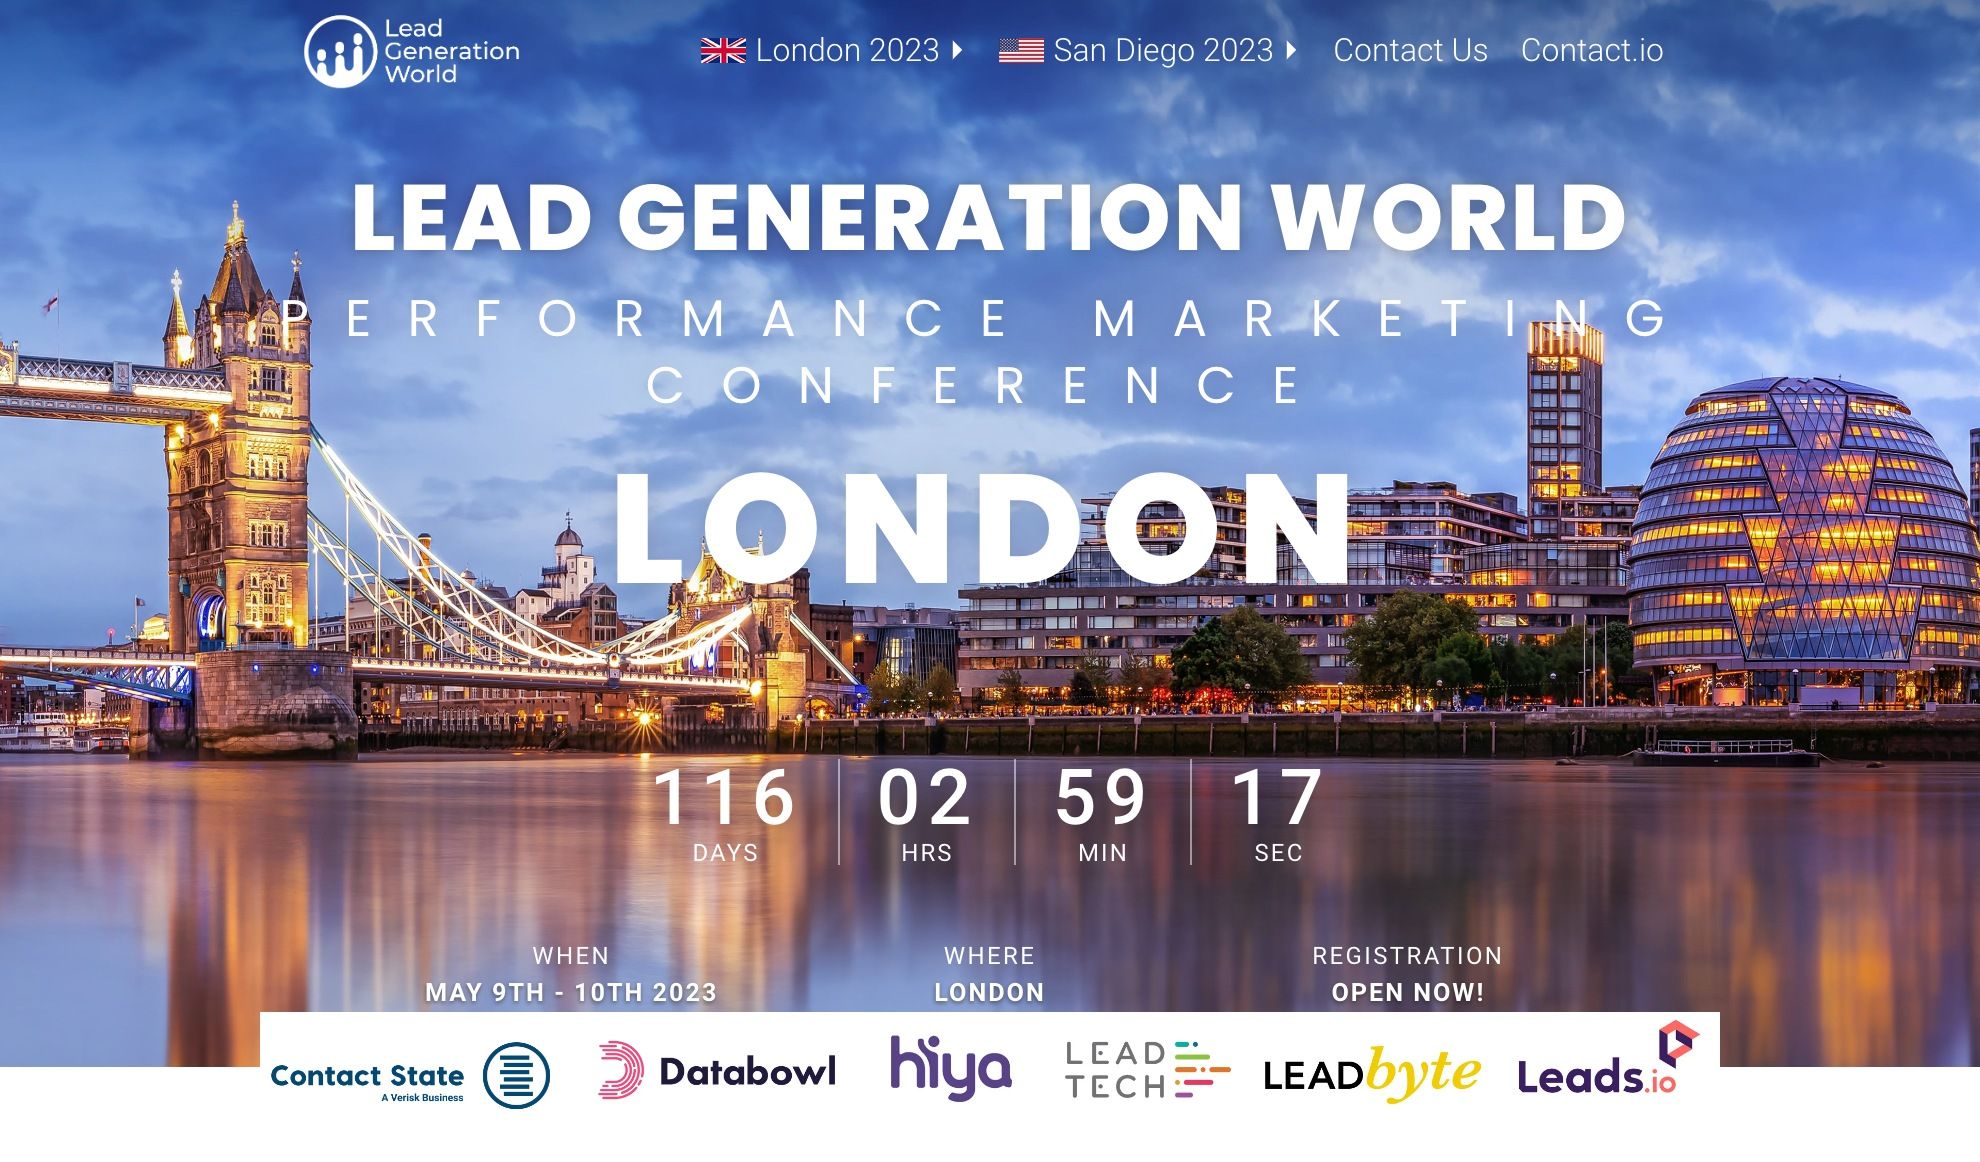 Sales event worth visiting in 2023: Lead Generation World London